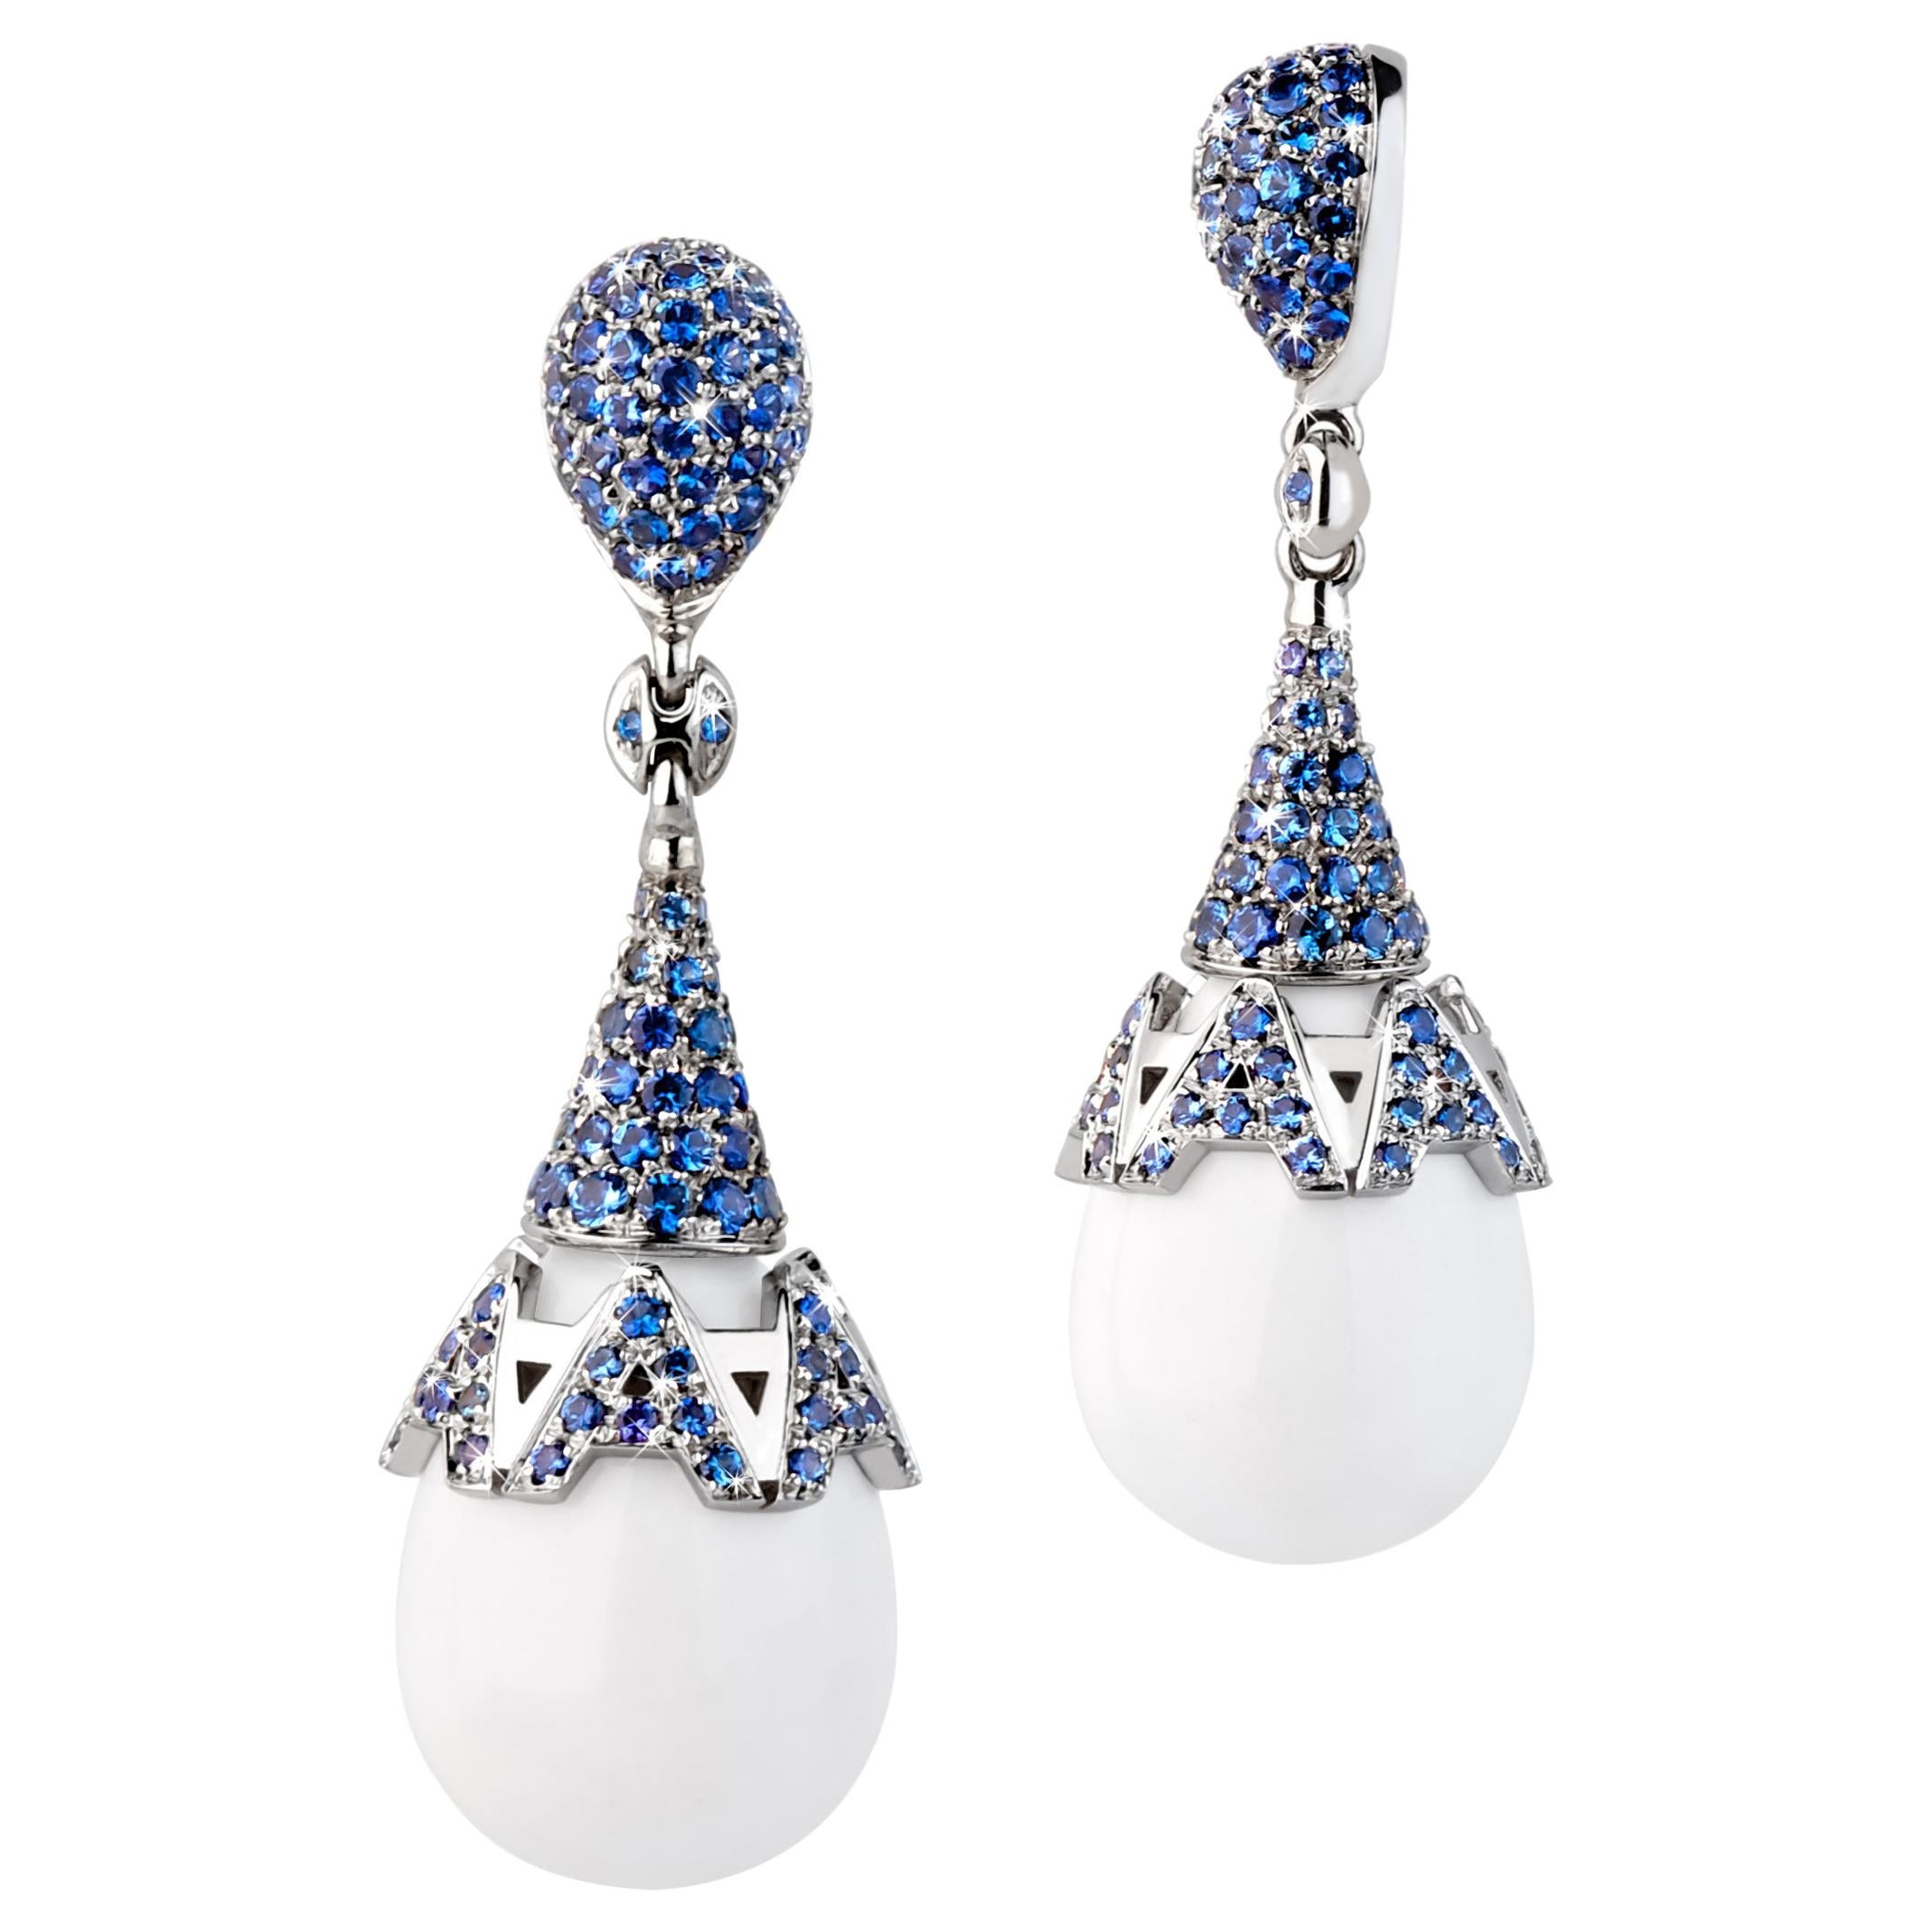 White Gold Earrings with Blue Sapphire Pavè and White Opal Drop with Rotating "A For Sale